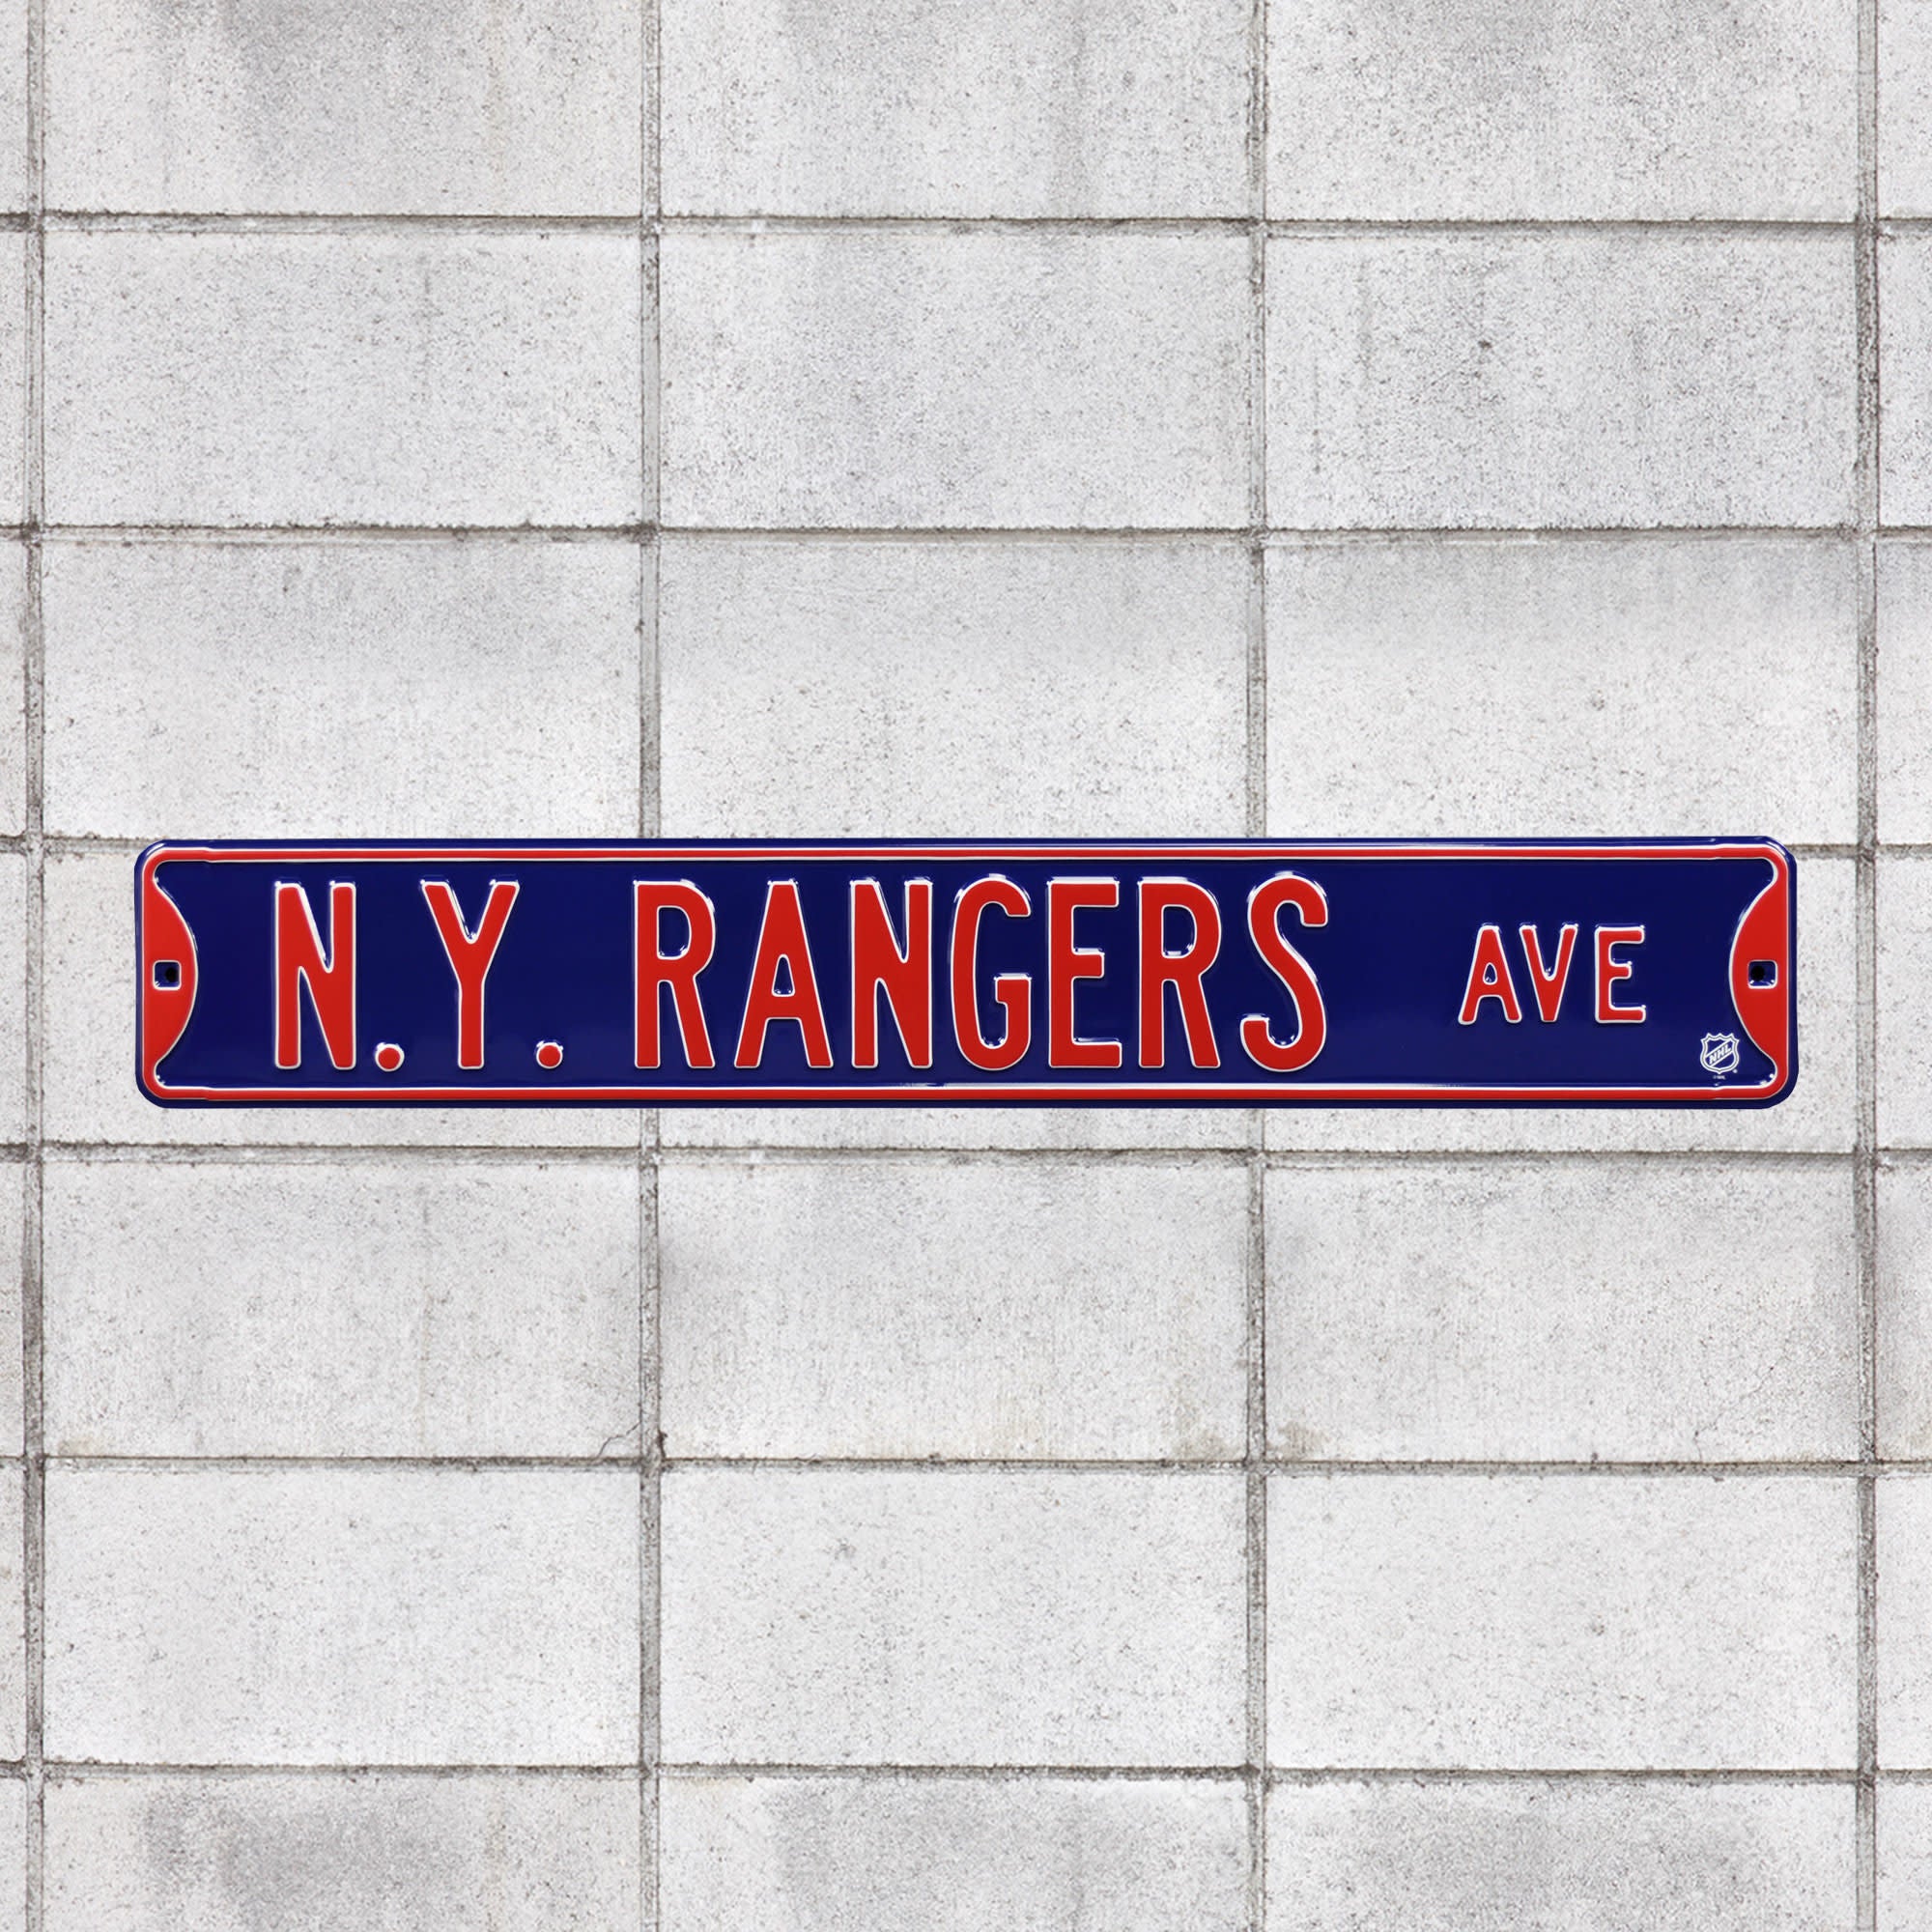 New York Rangers: New York Rangers Avenue - Officially Licensed NHL Metal Street Sign 36.0"W x 6.0"H by Fathead | 100% Steel